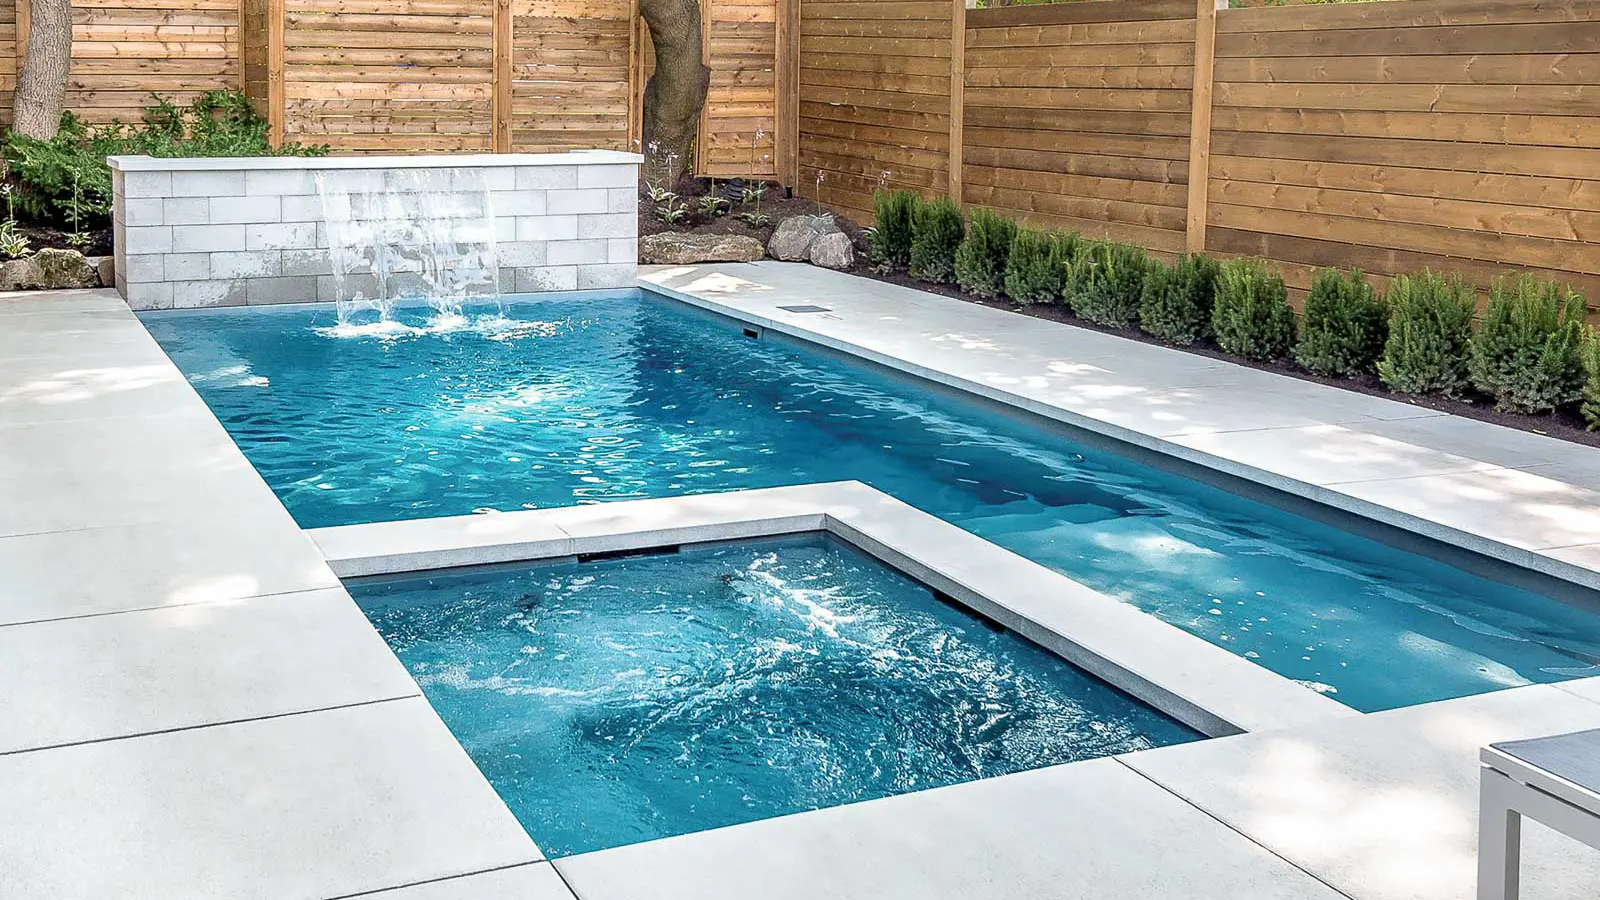 The Limitless, a rectangular fiberglass pool with built-in spa